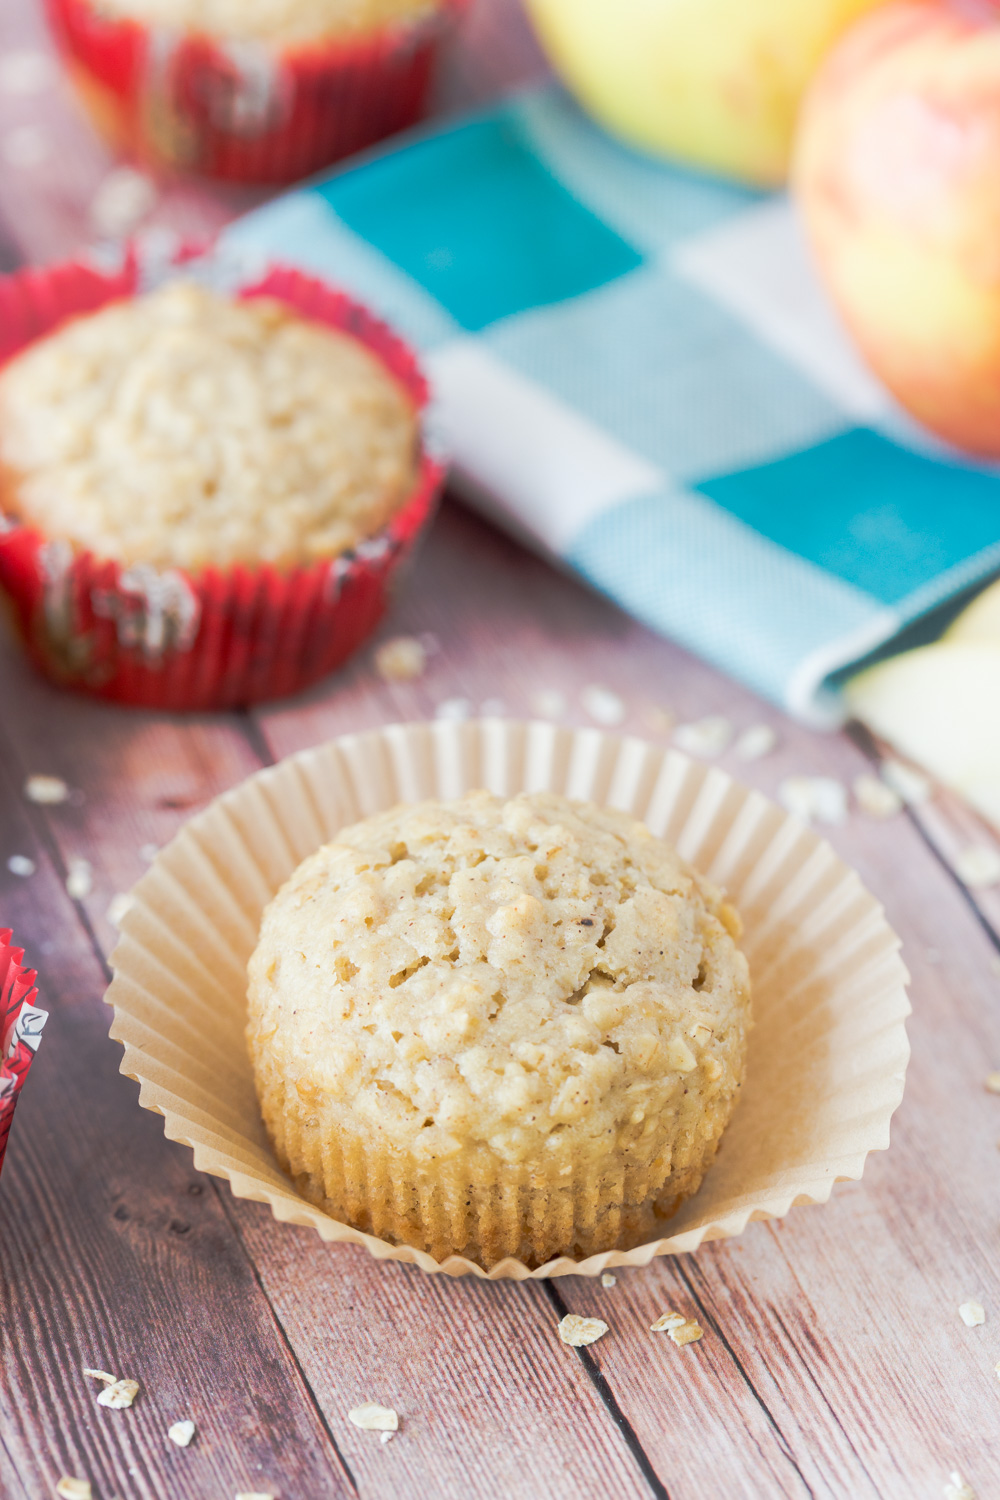 These Oat & Apple Muffins are the perfect breakfast muffin.  They have a touch of sweetness from the honey and apples and a hint of fall with the cinnamon spice.